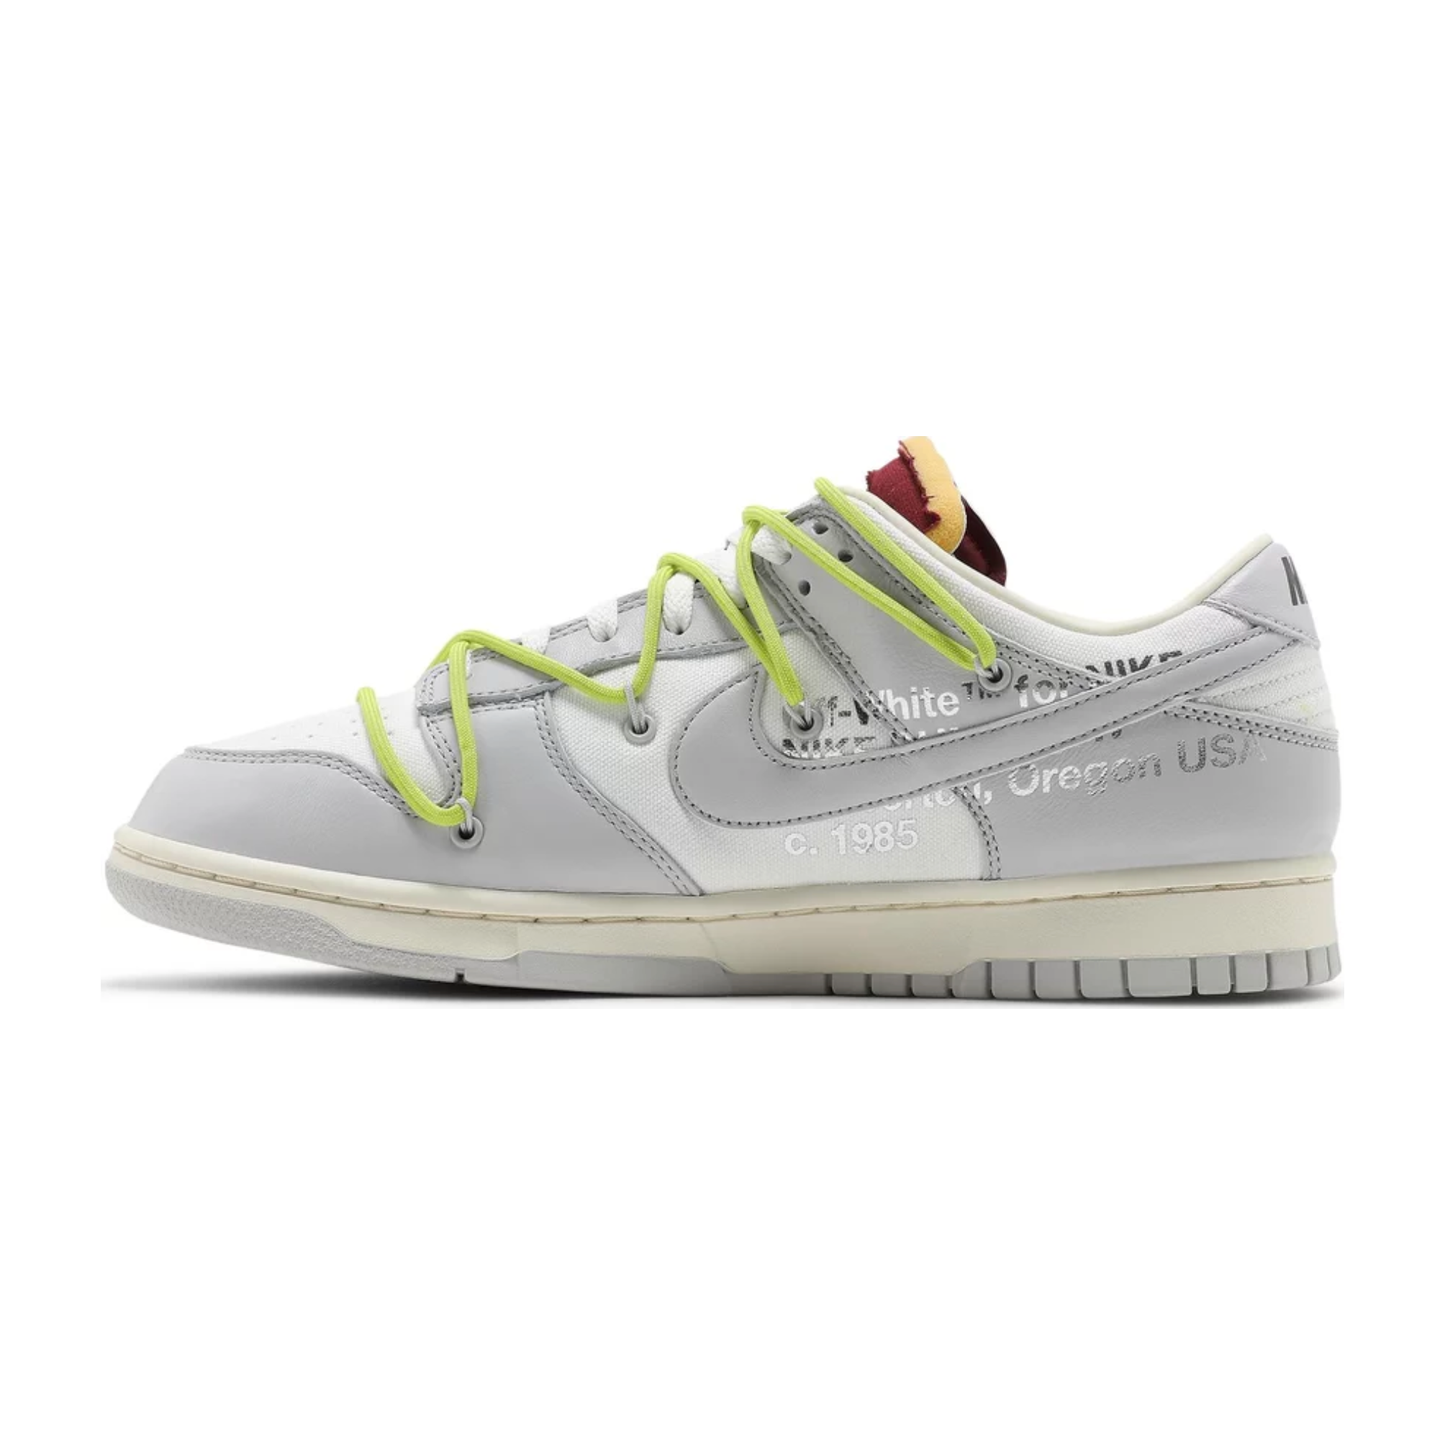 Nike Dunk Low Off-White Lot 8 by Nike from £425.00